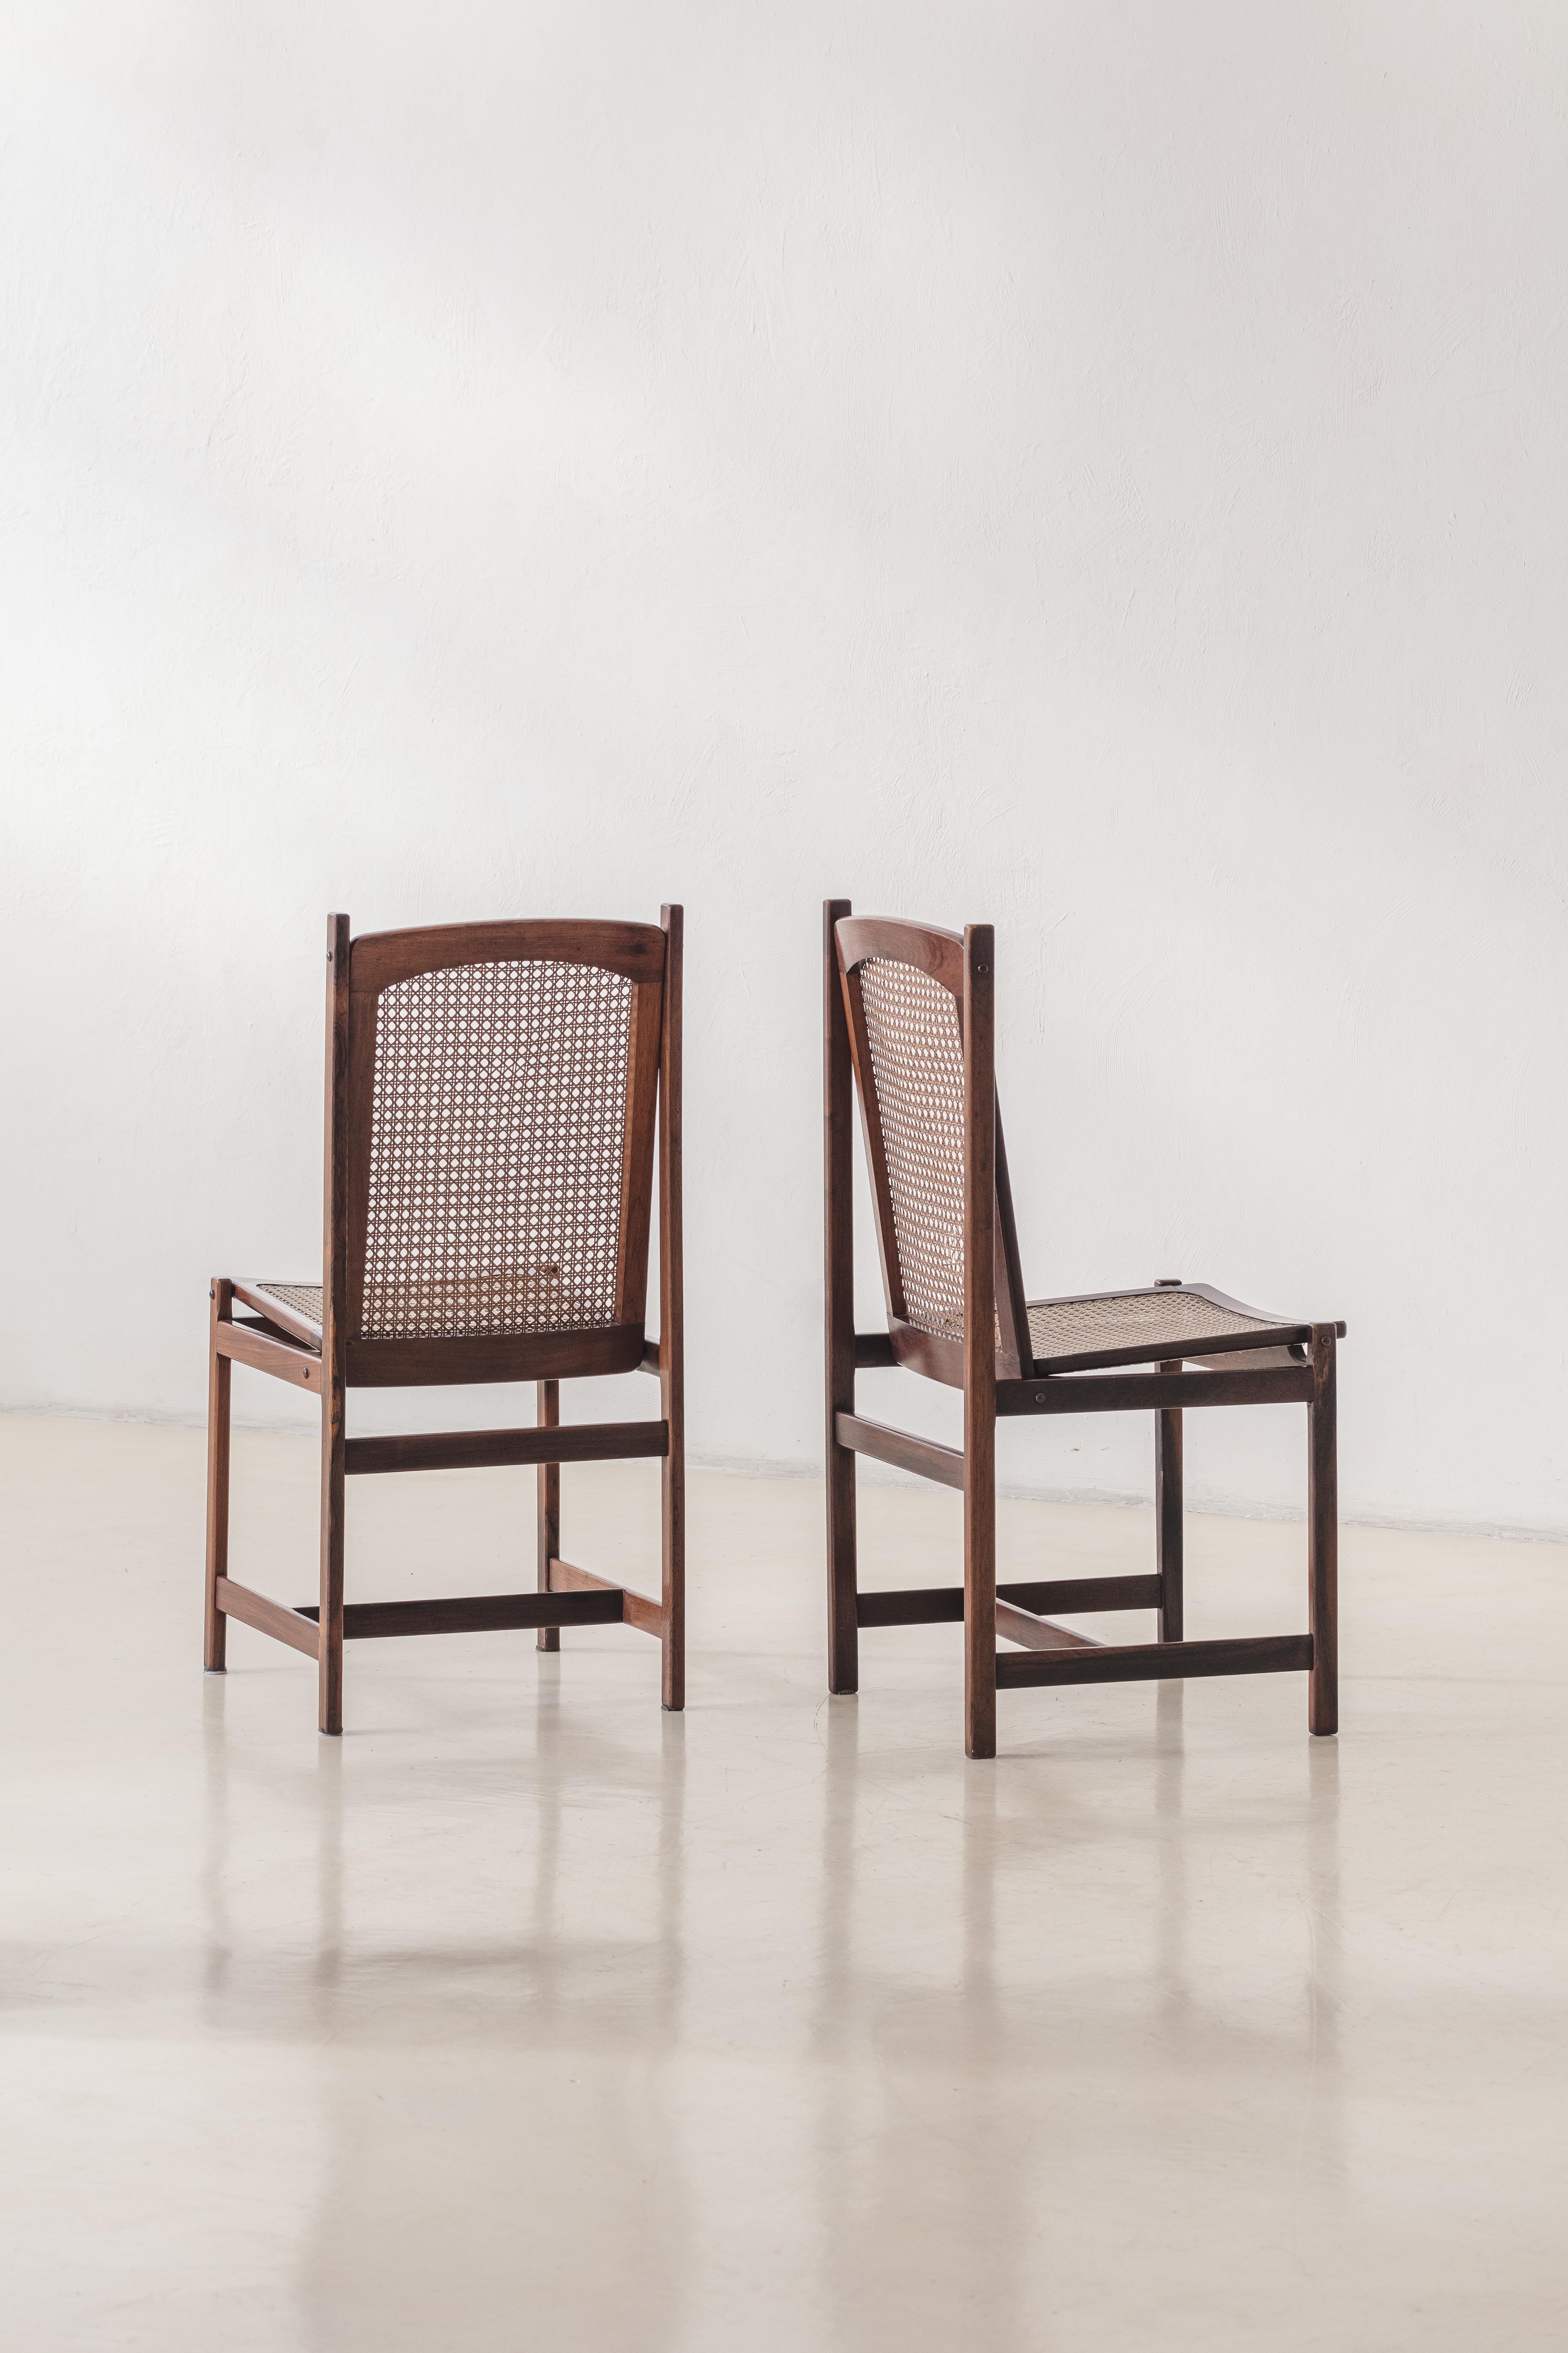 Celina Decorações set of six Dining Chairs, Rosewood and Cane, Mid-Century 1960s en vente 3